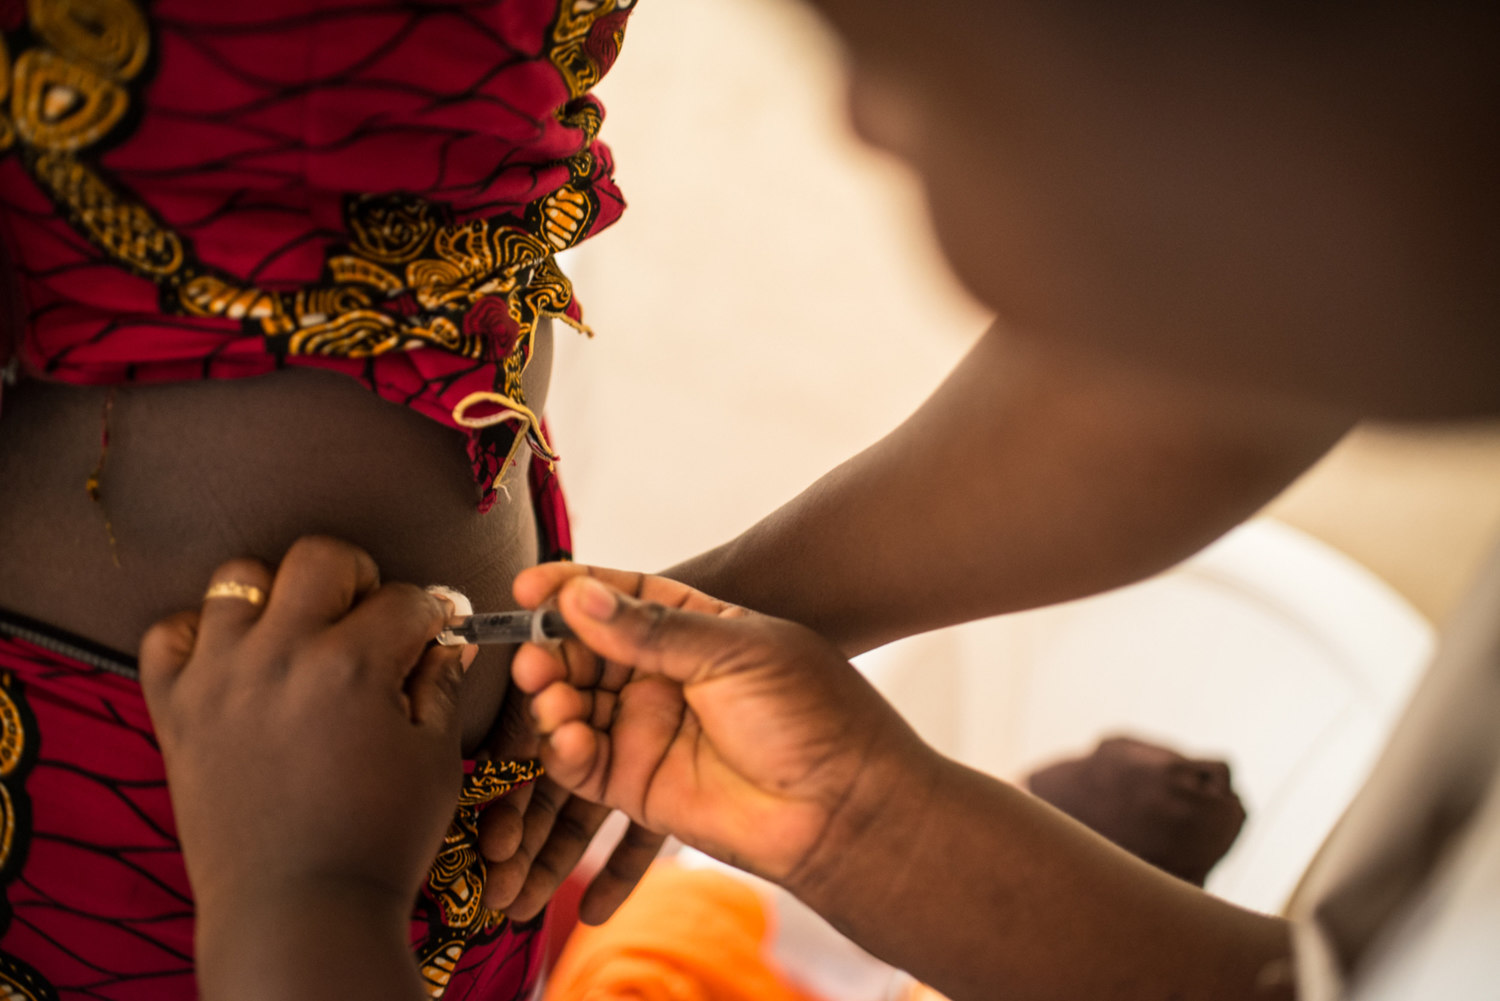  Ms. Takubu opted to get an injection to prevent pregnancy rather than take birth-control pills. Aisha Takubu, who already has four children, went to a family-planning center in Lokoja to discuss birth control, still a touchy subject in much of Niger